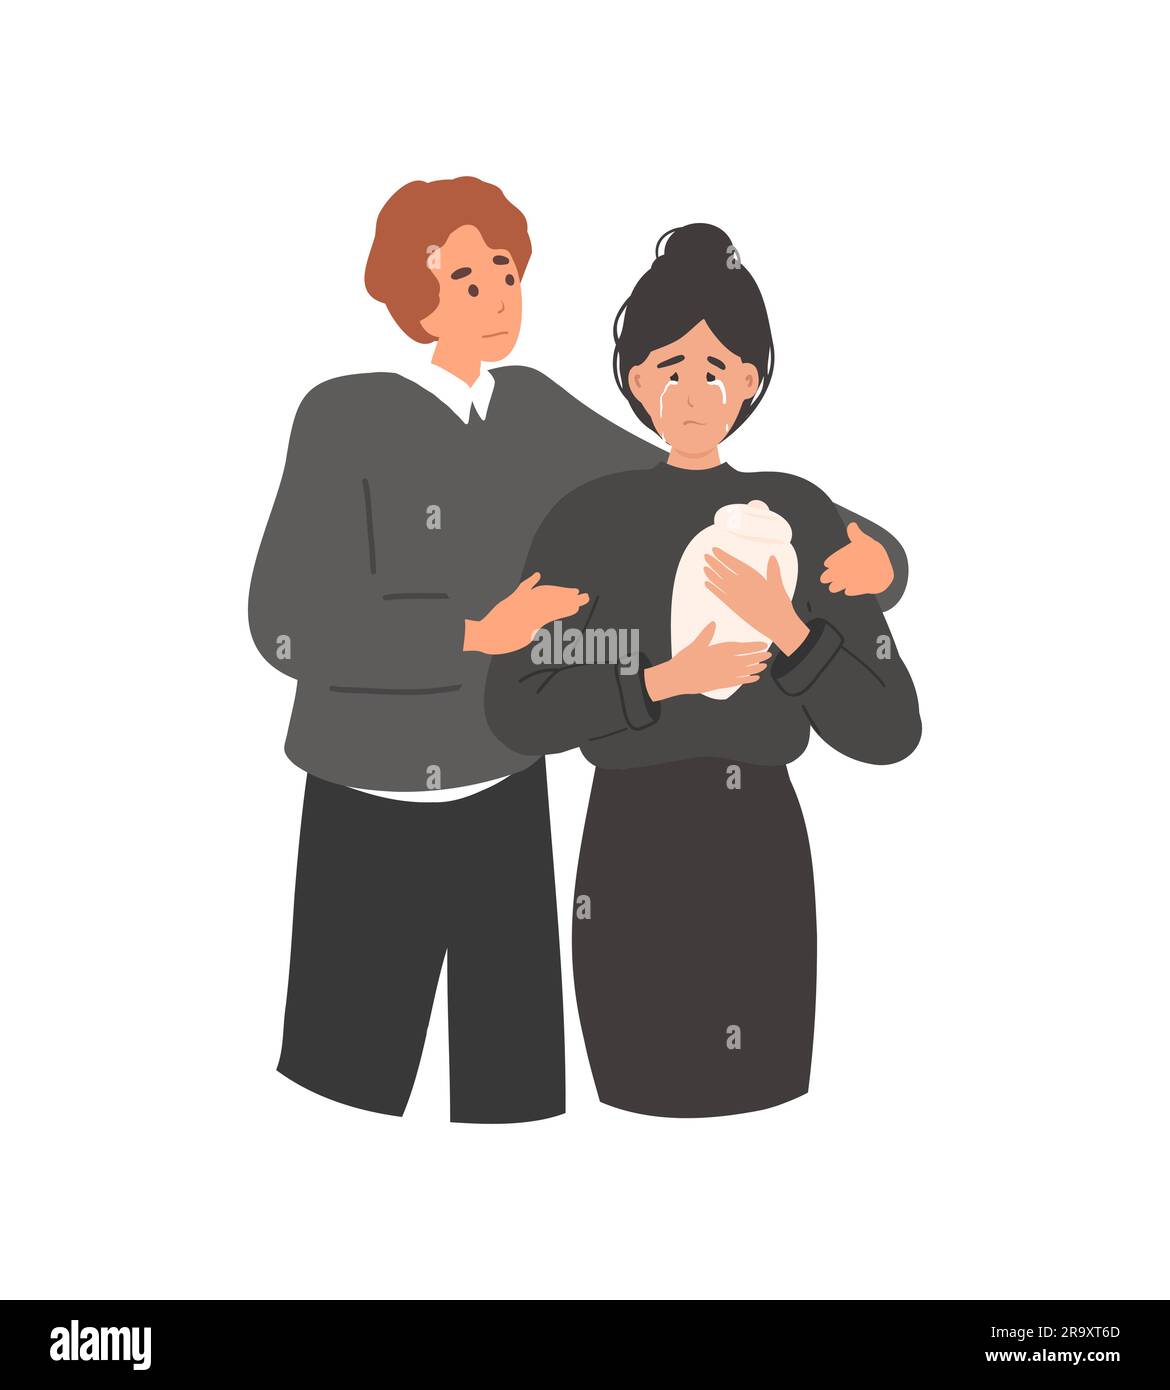 Unhappy people with bad mood, suffering from grief Stock Vector